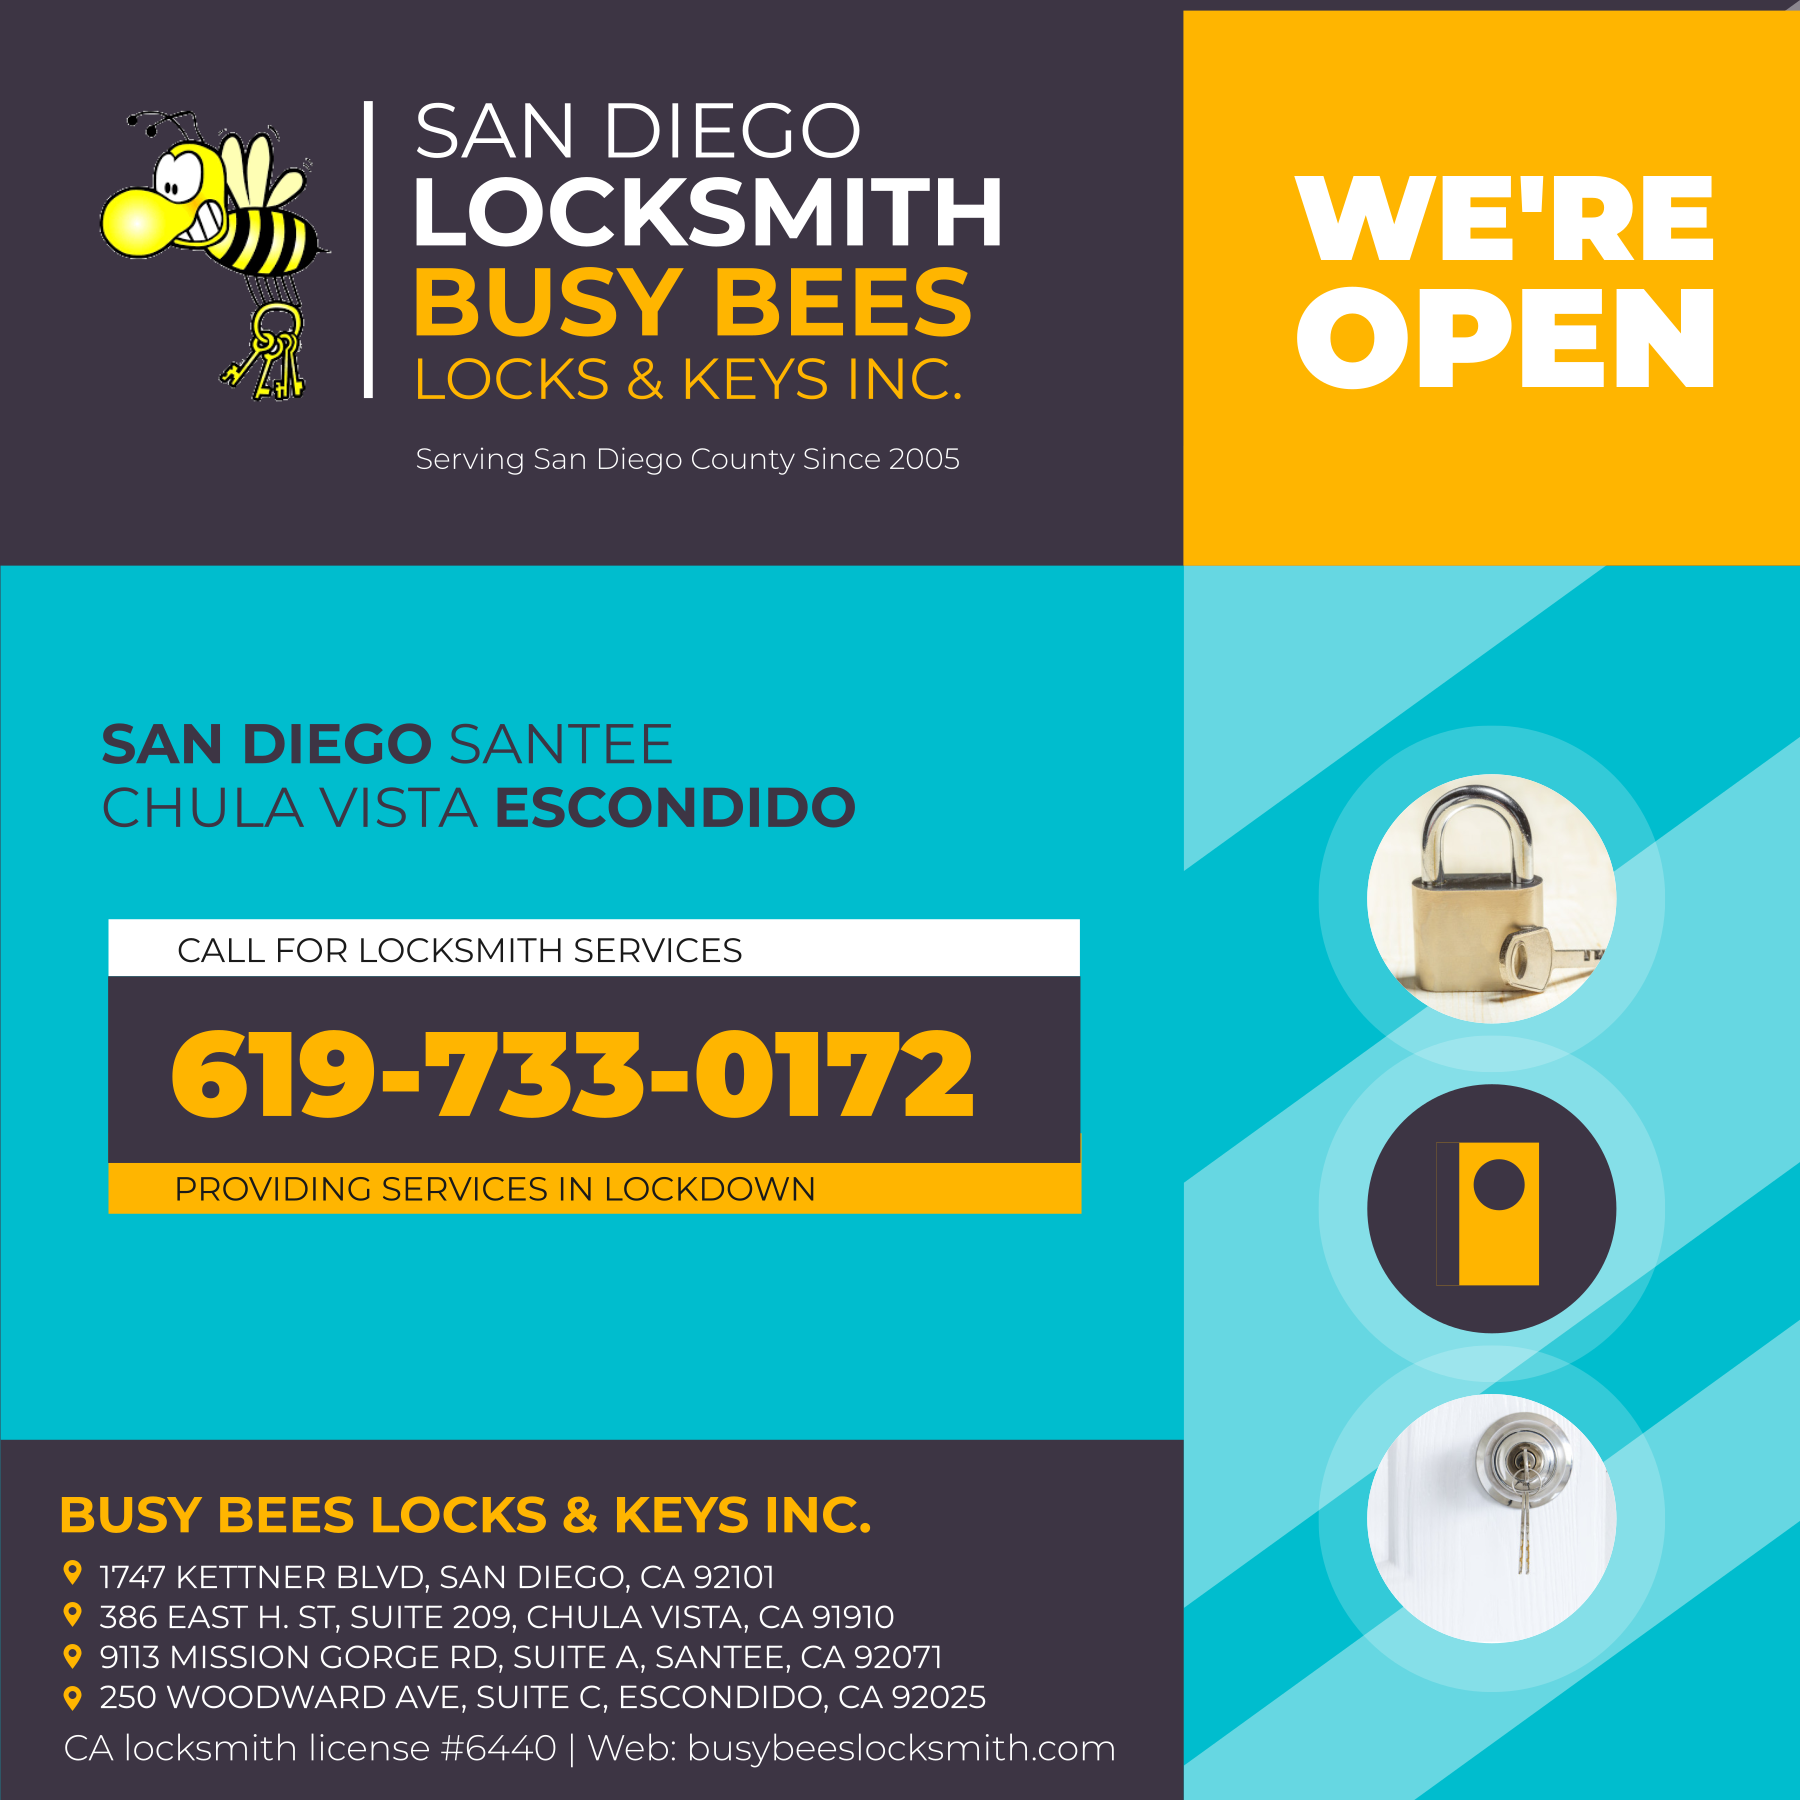 Busy Bees Locksmith Services Available During Coronavirus Lockdown in San Diego